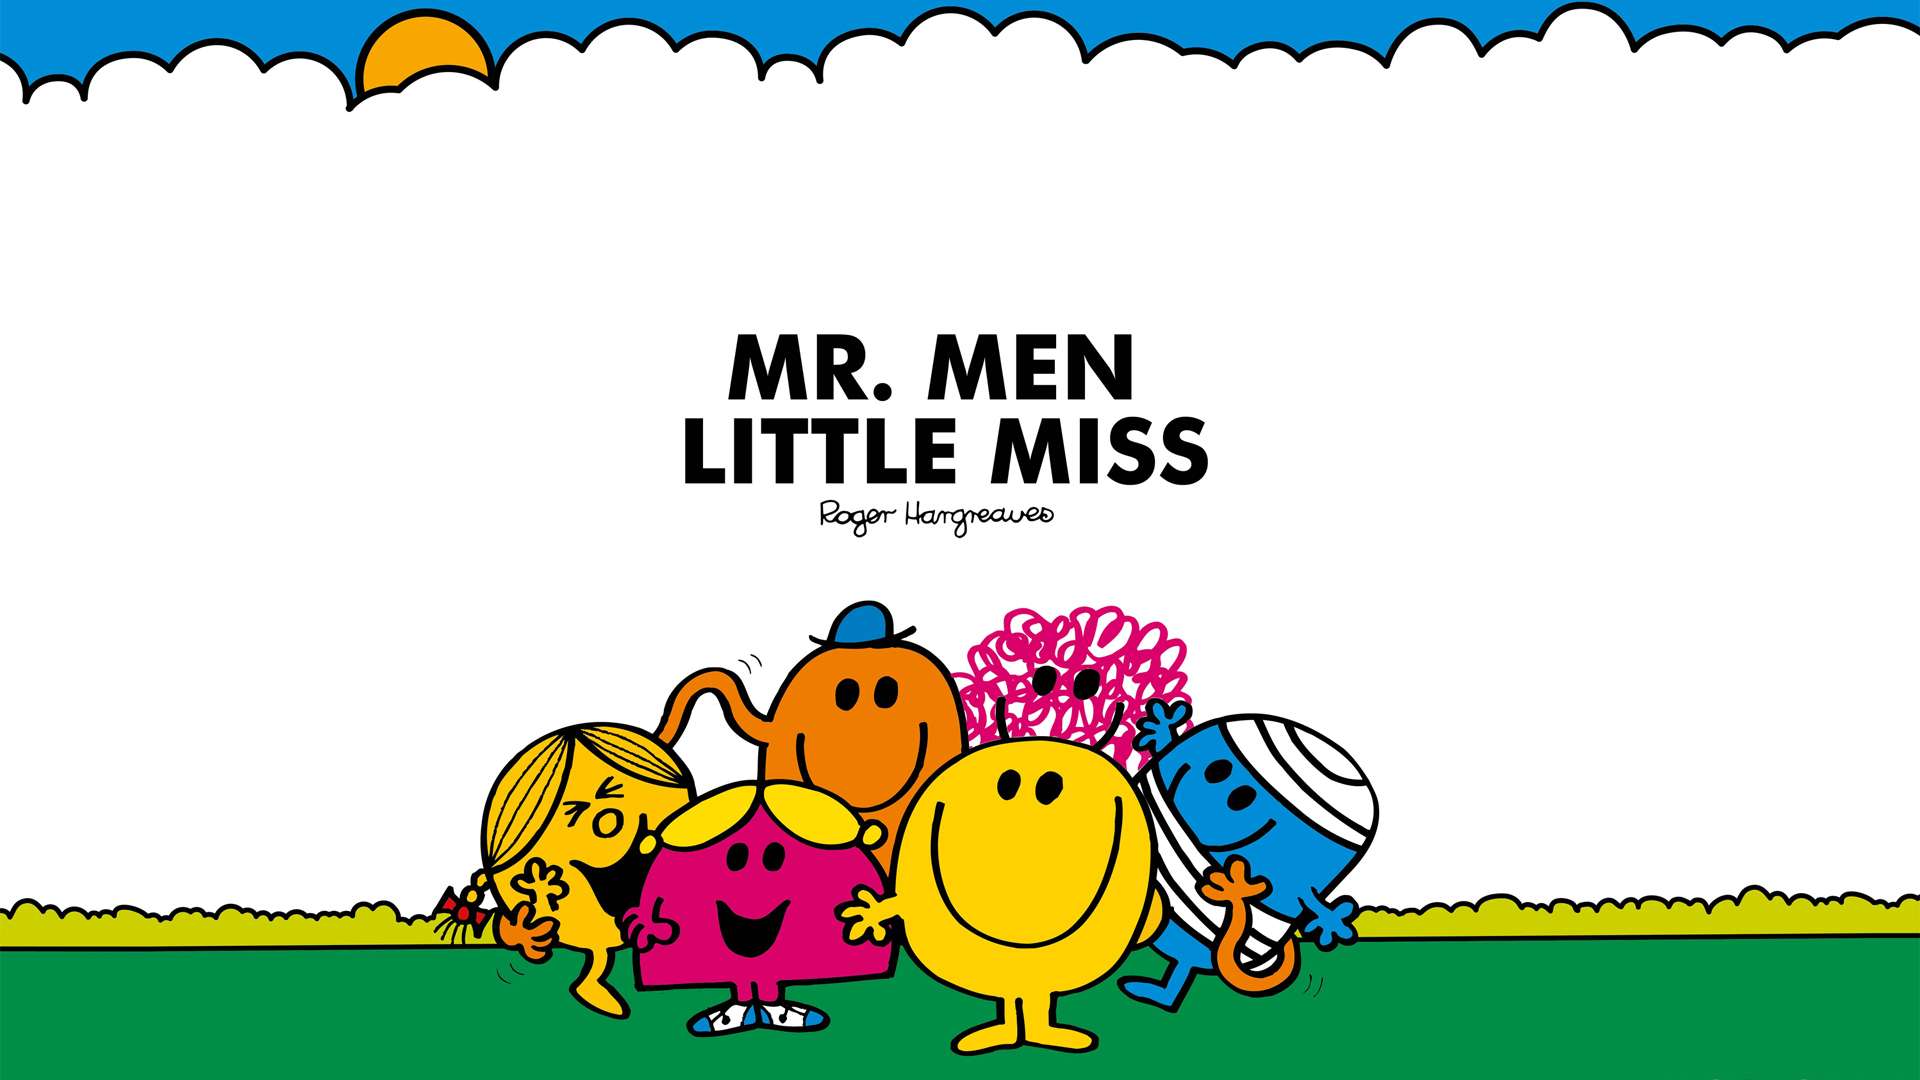 Fox Animation Secures Film Rights for 'Mr. Men and Little Miss' Books -  Rotoscopers